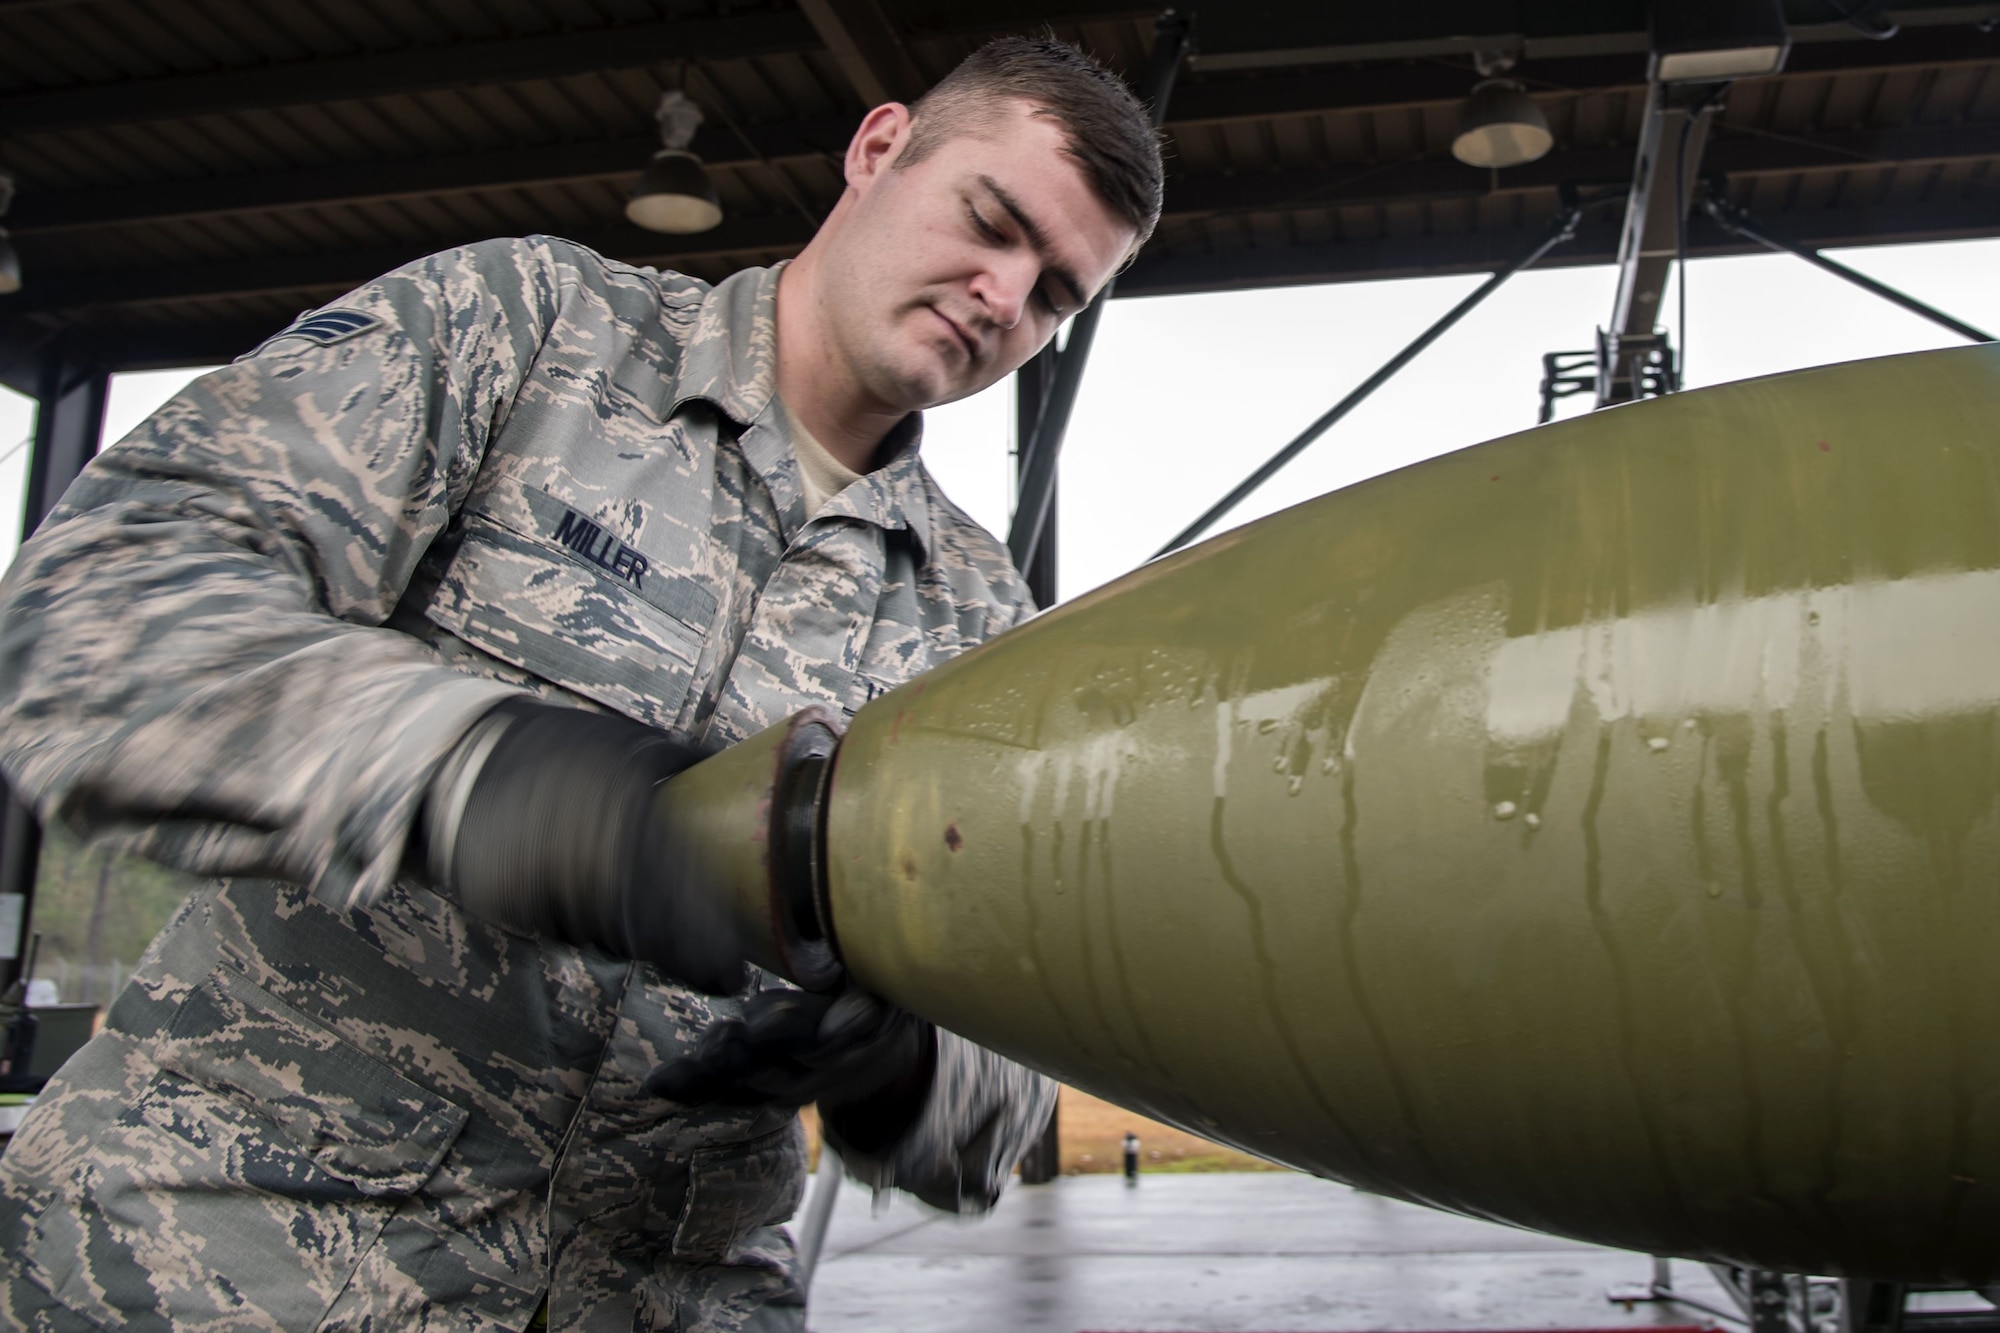 Senior Airman August Miller, 23d Maintenance Squadron (MXS) stock pile management technician, screws the nose cone on to a Joint Direct Attack Munition, Jan. 11, 2018, at Moody Air Force Base, Ga. The 23d MXS held a combat munitions class to help acclimate and improve their Airmen’s readiness to perform well in a deployed environment.  (U.S. Air Force photo by Airman Eugene Oliver)